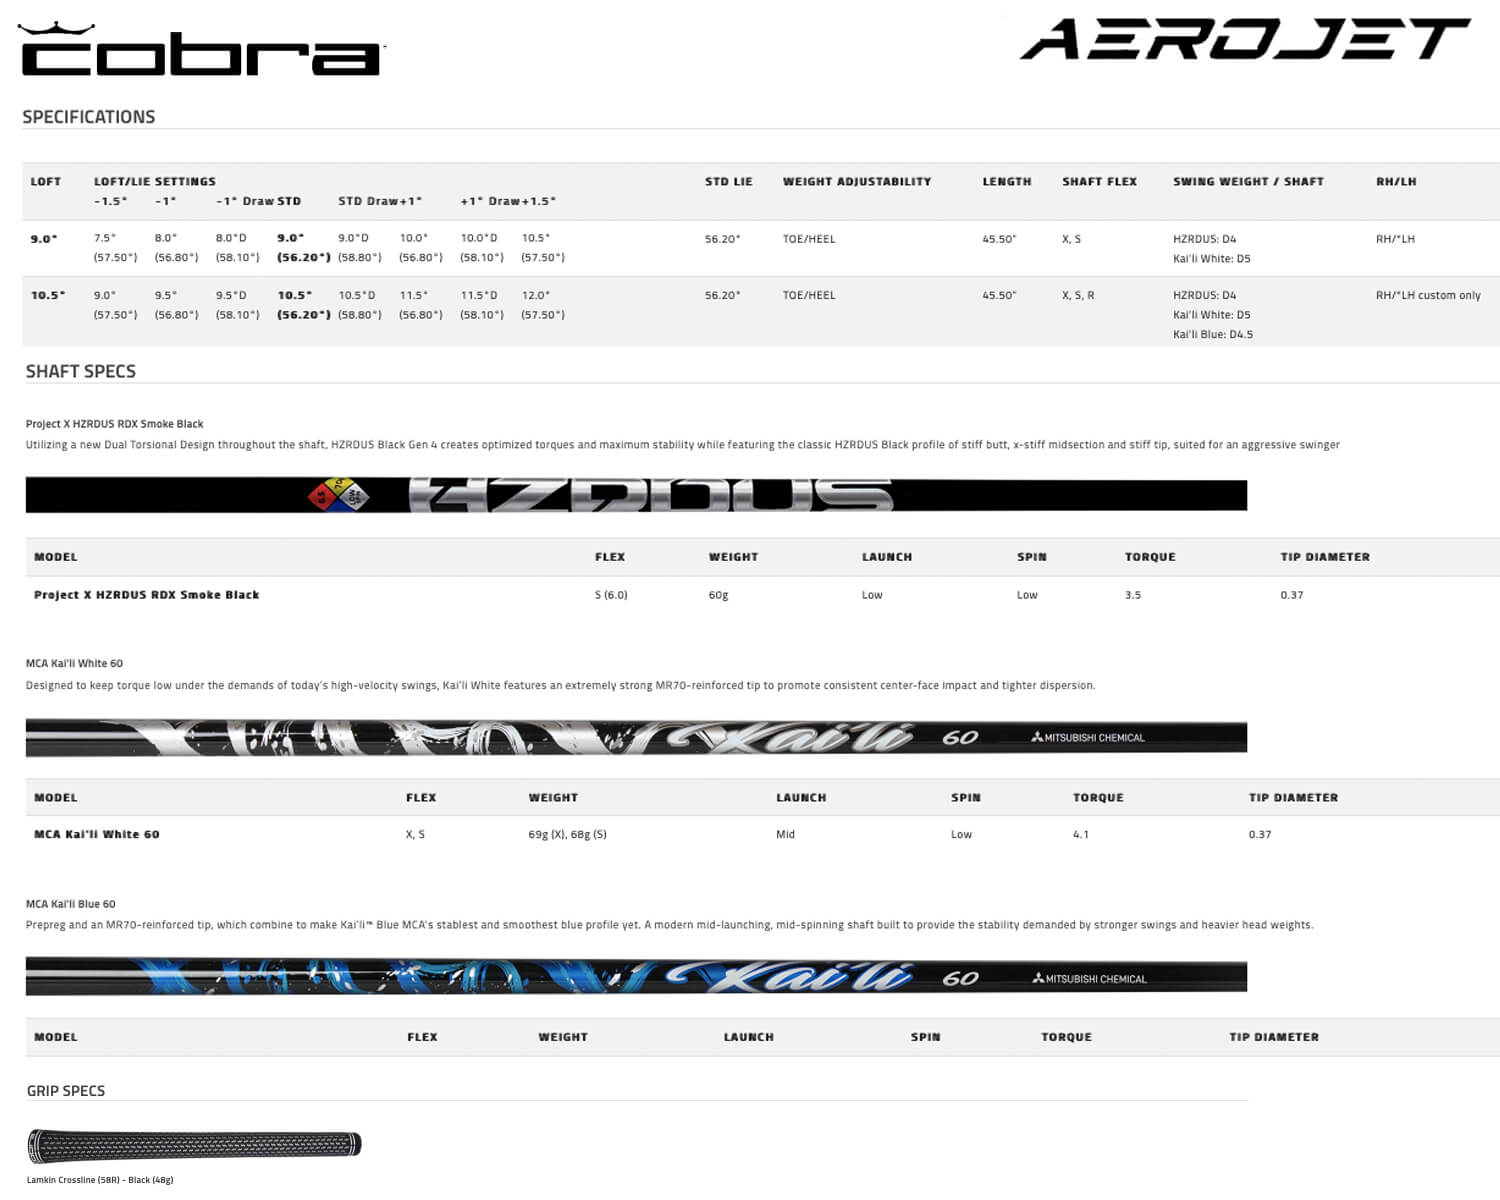 Specification for Cobra Aerojet LS Golf Driver